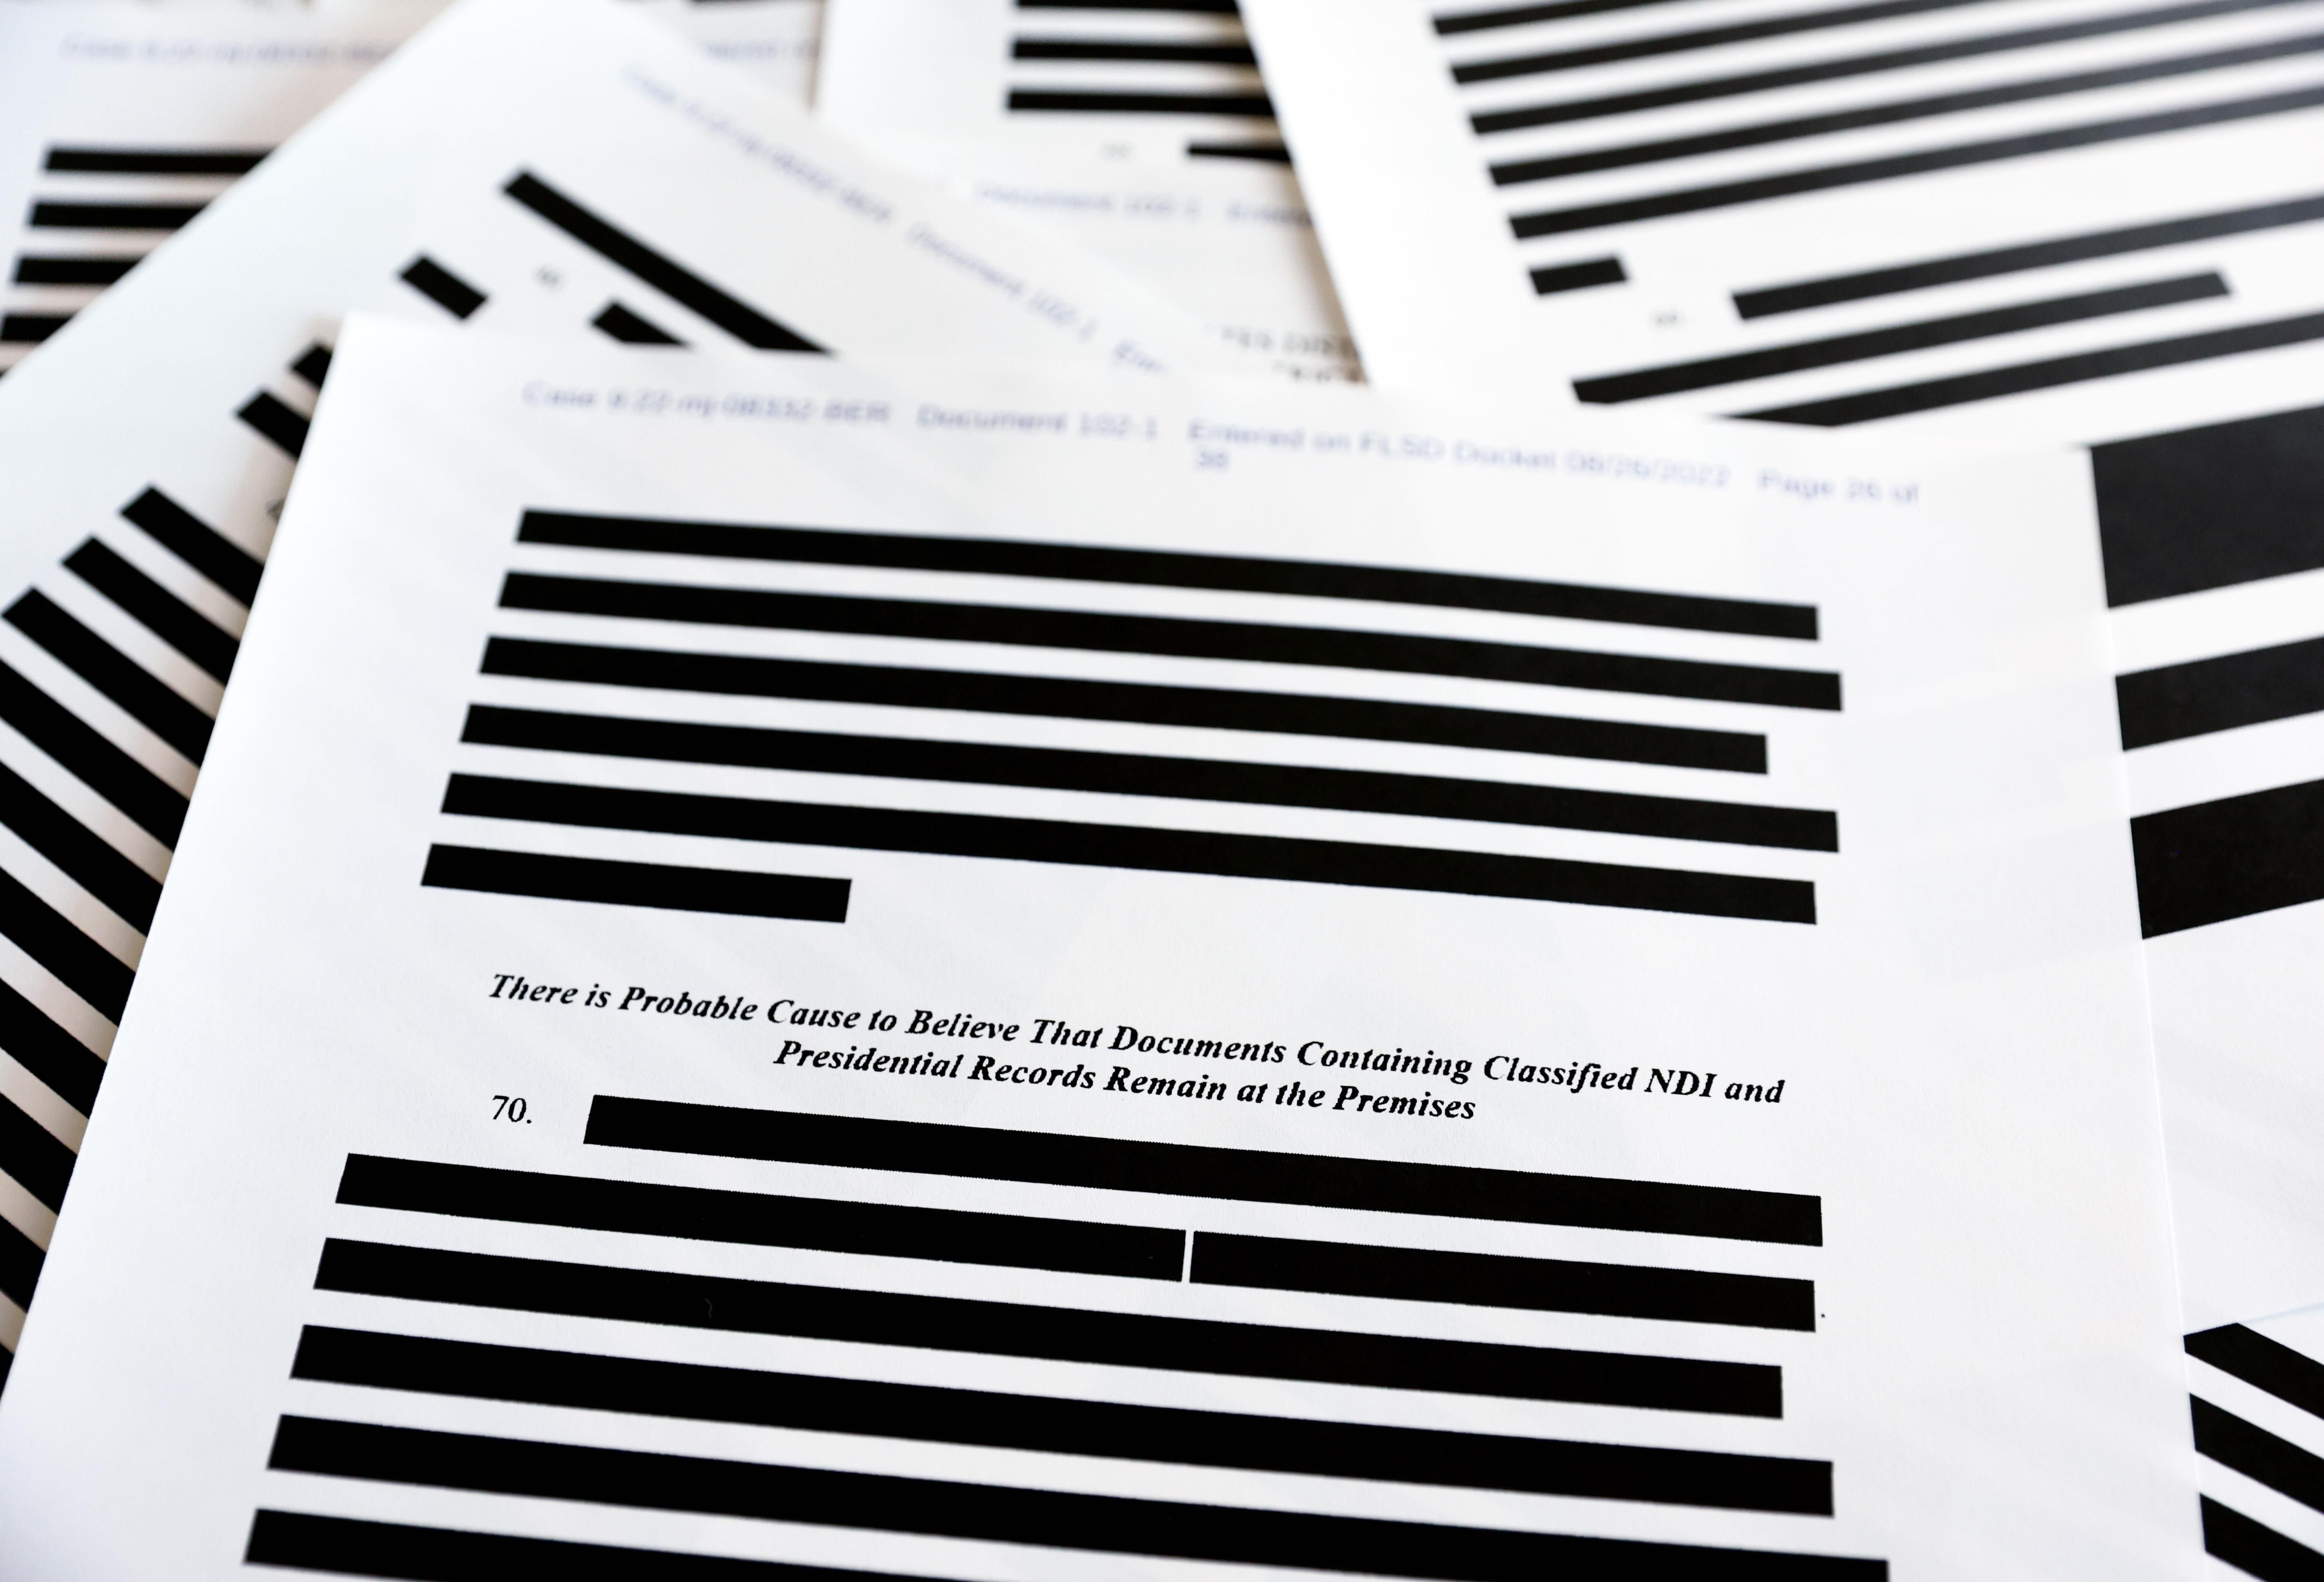 Heavily redacted classified documents are pictured